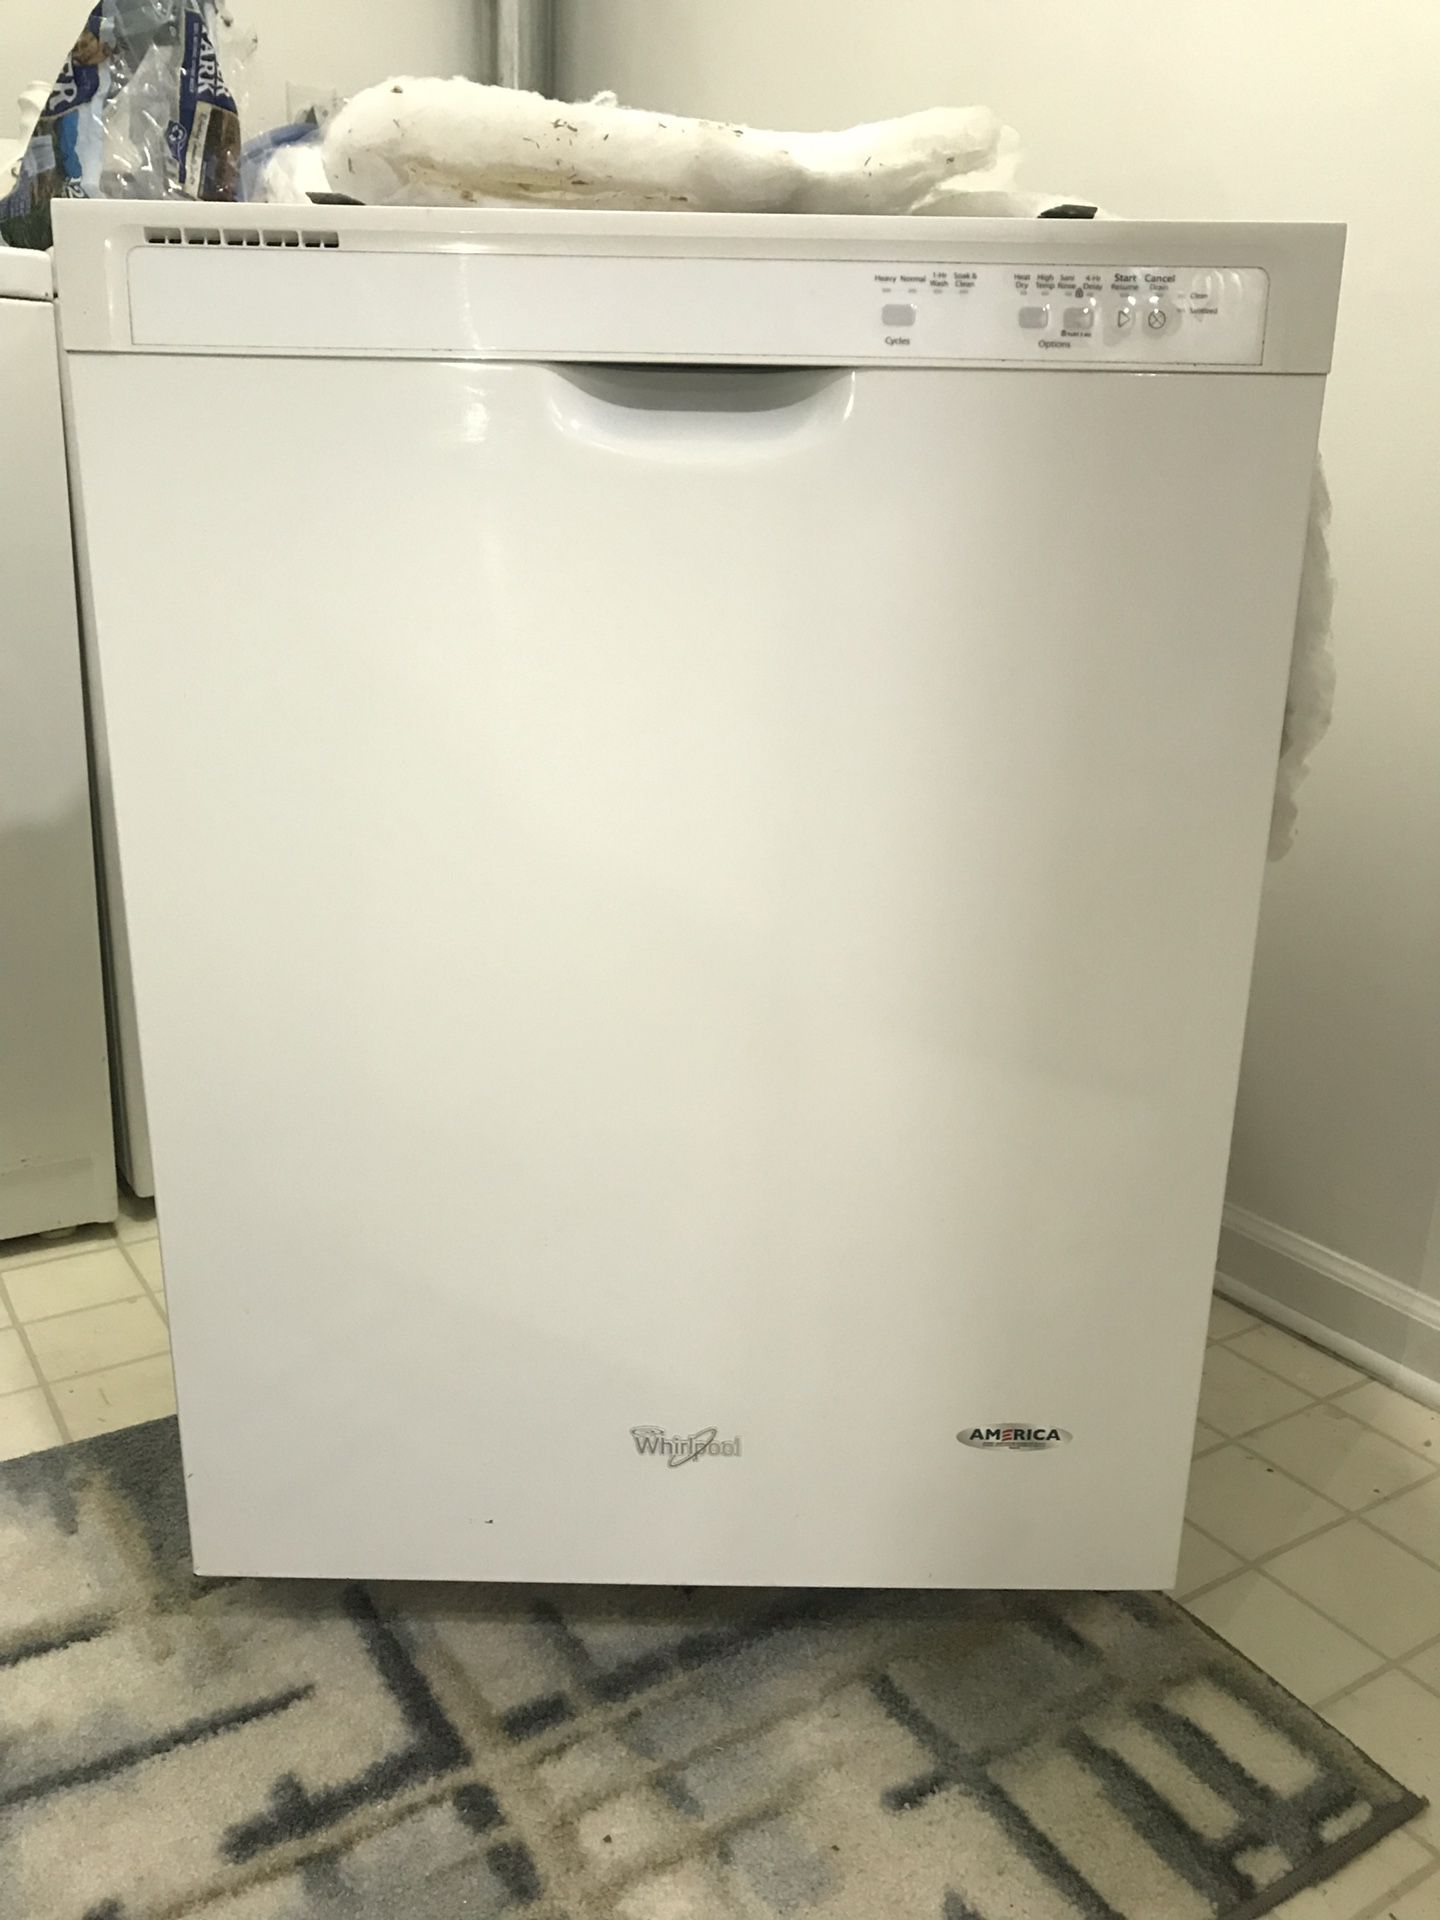 Whirlpool Dishwasher with Hose and Insulation